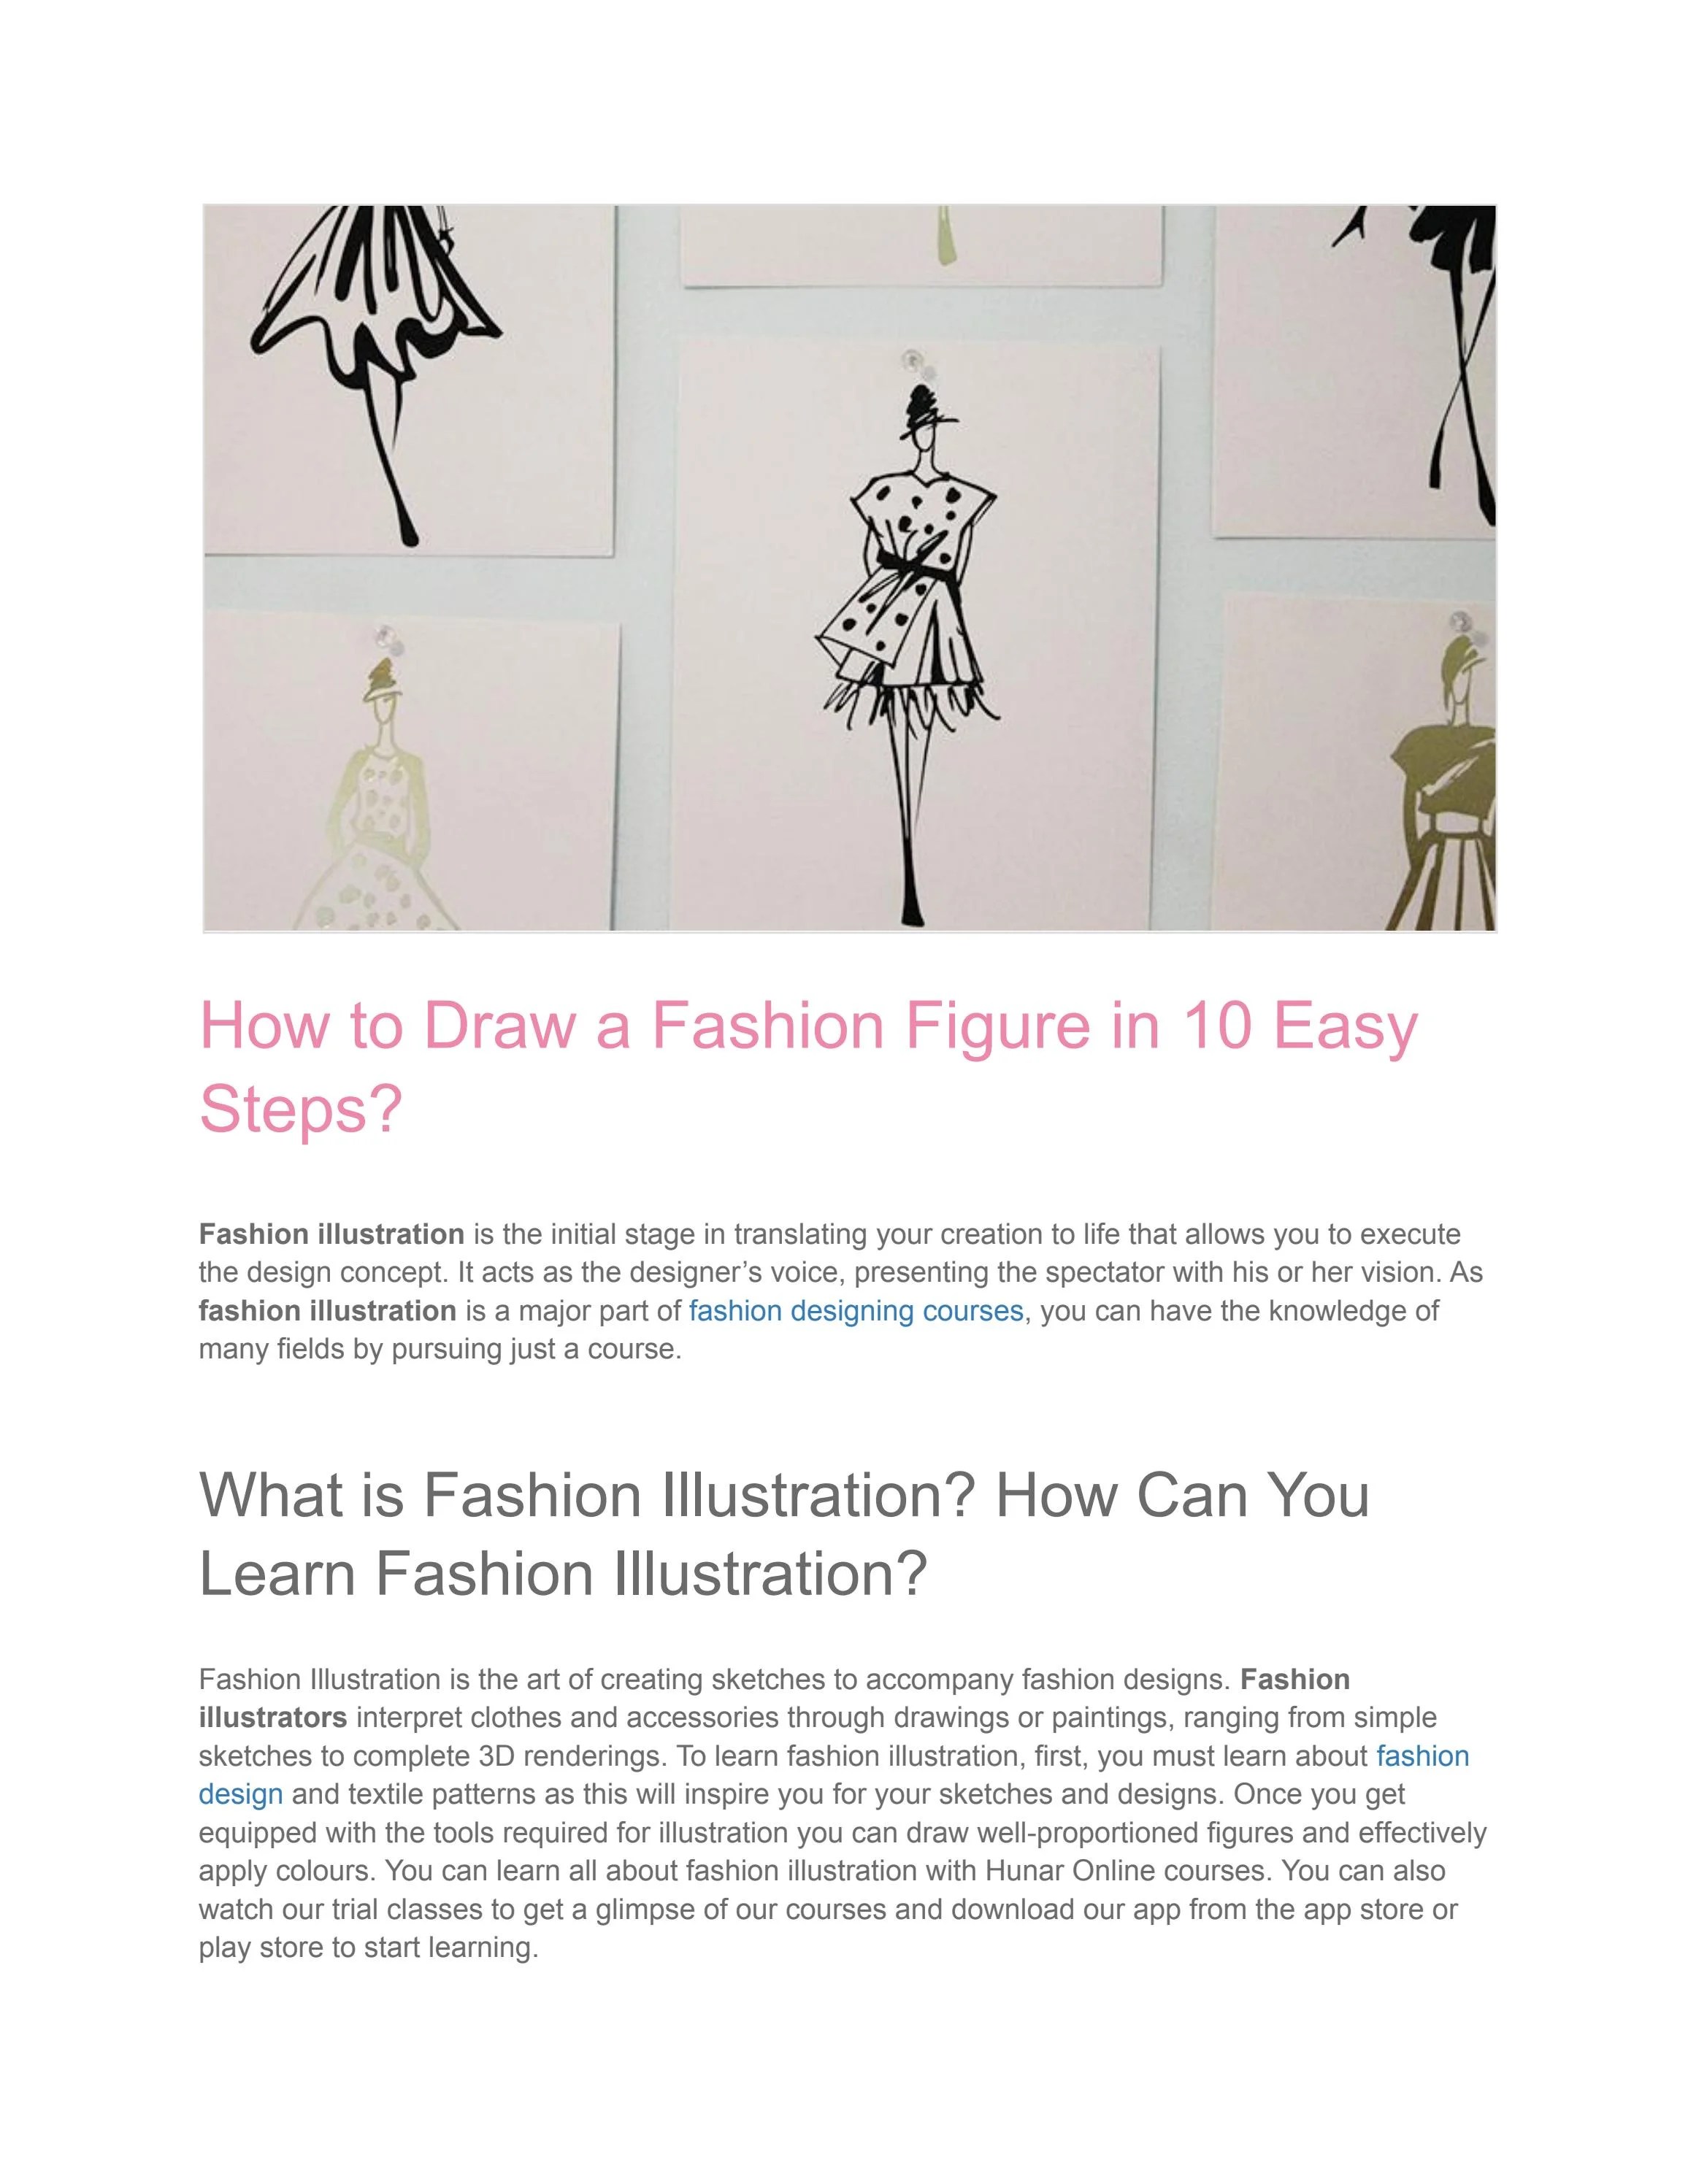 Learn To Draw Fashion Figures